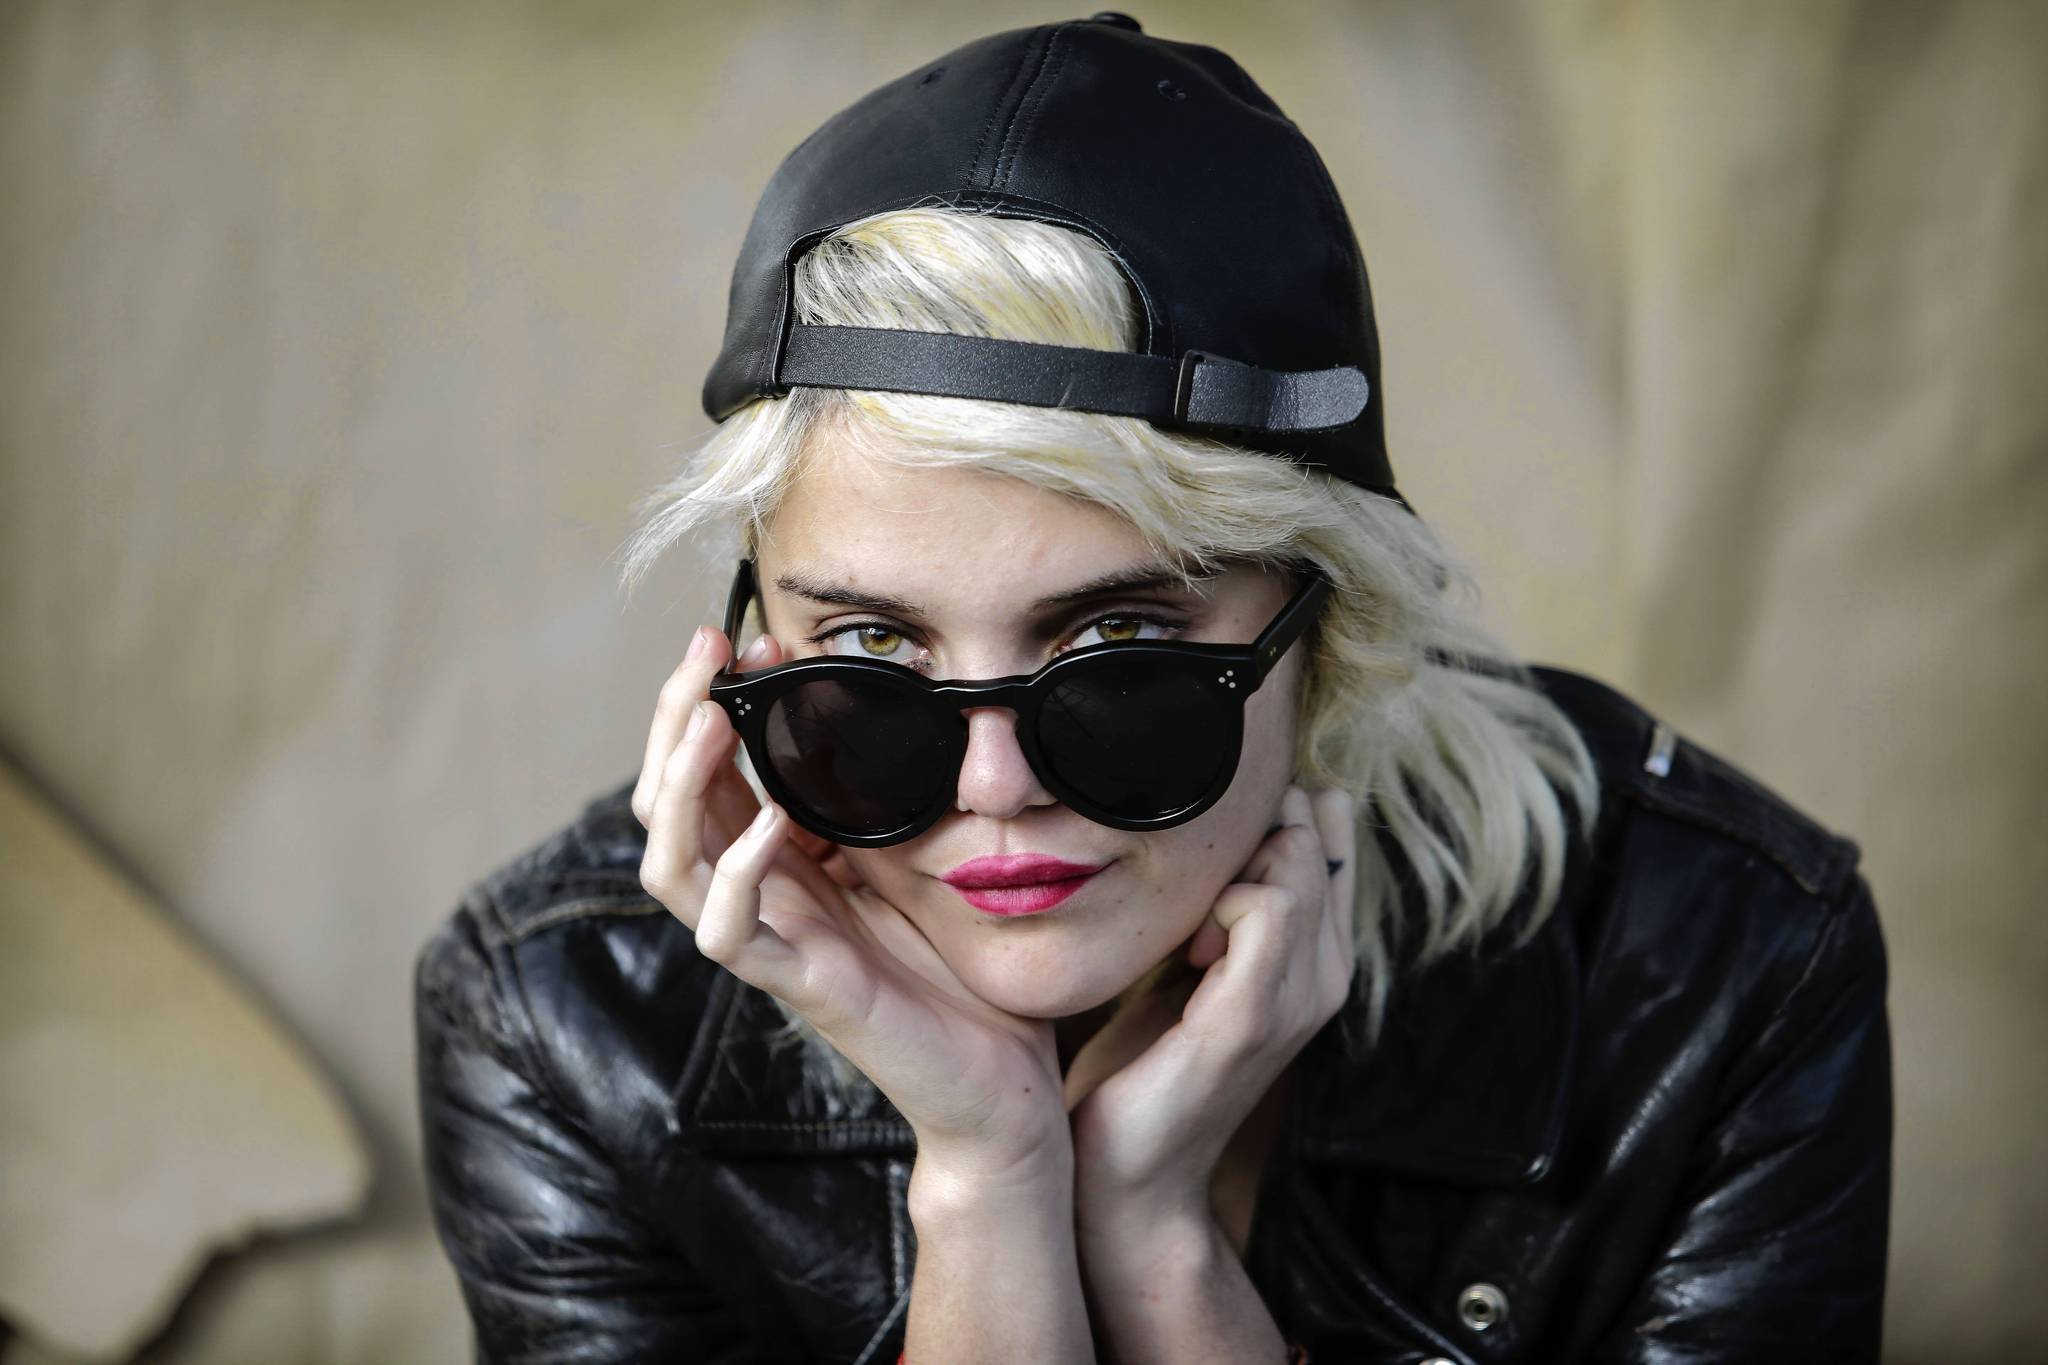 For Sky Ferreira, it's at last 'Night Time, My Time' - Hoy